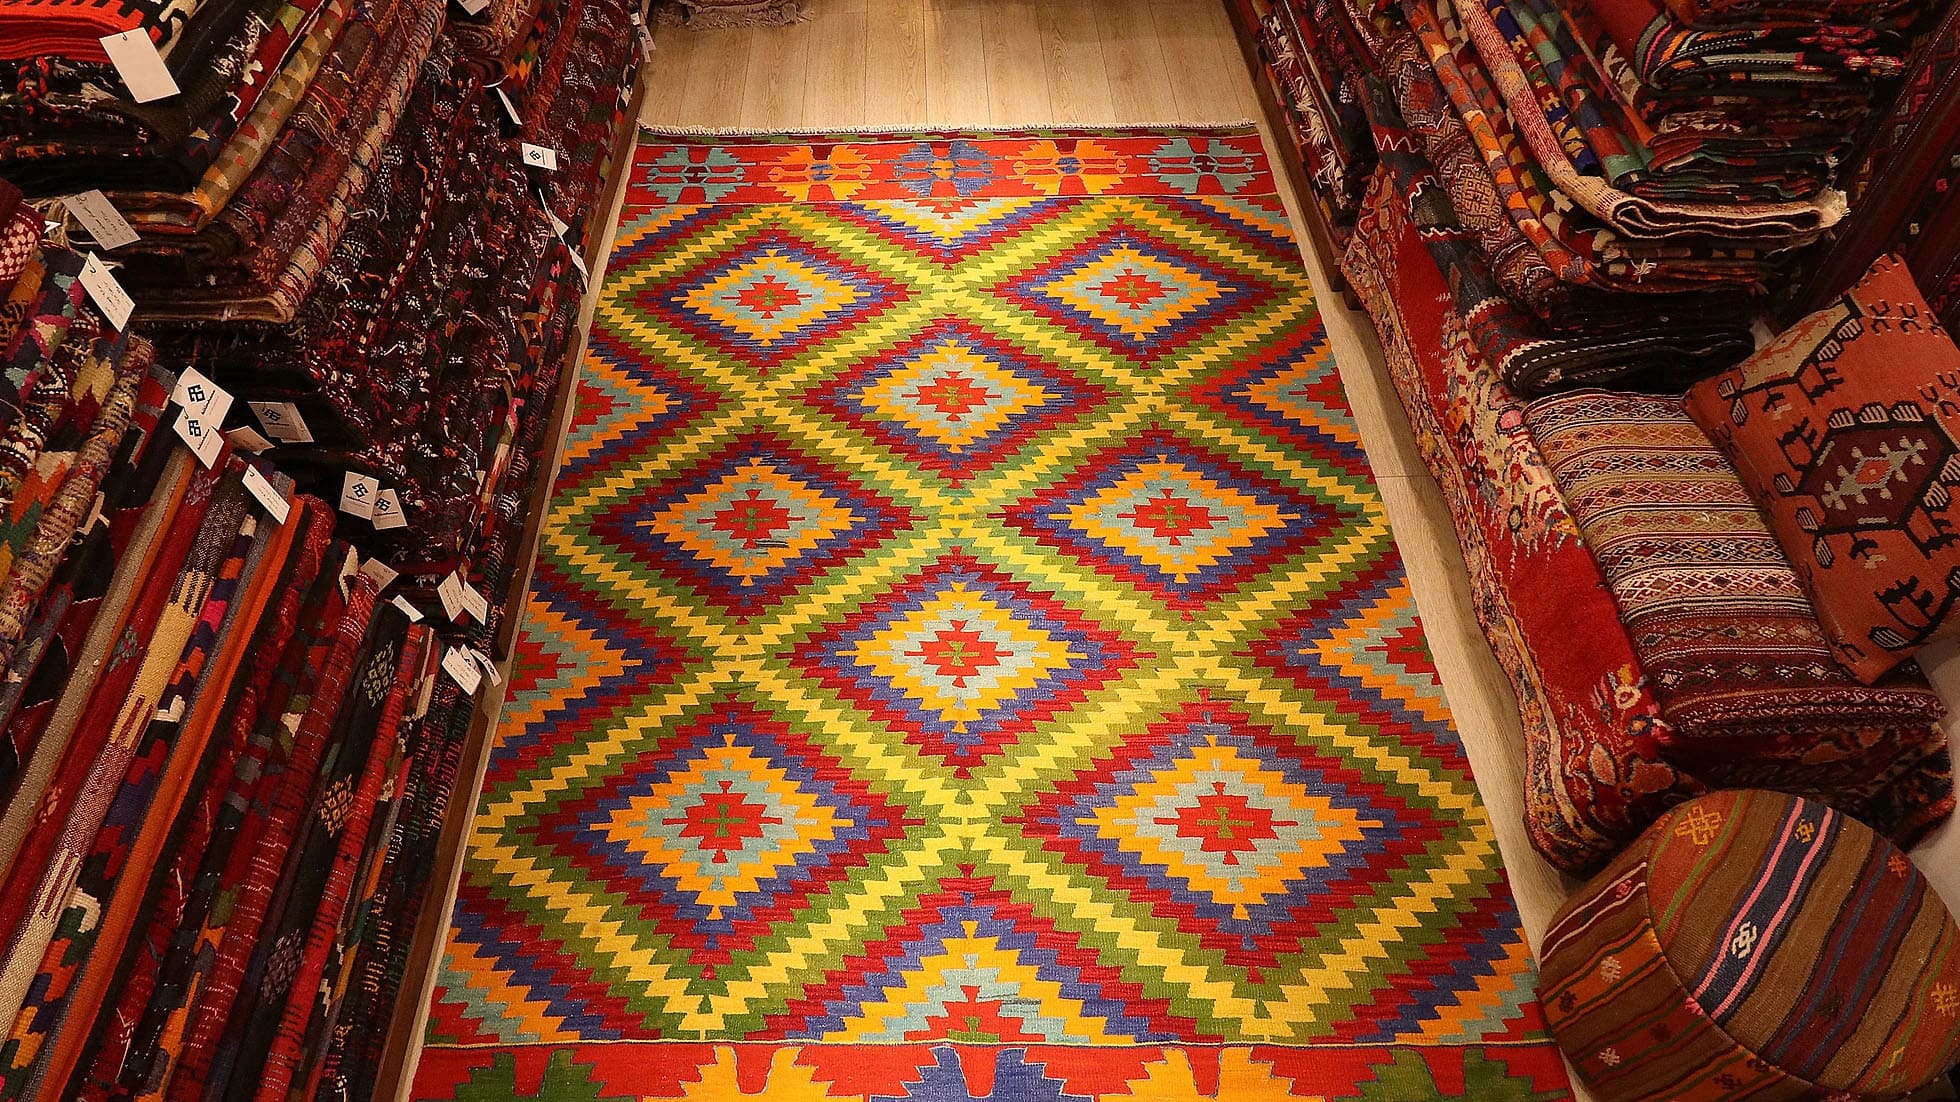 vibrant, vivid, and colorful vintage Turkish rug in geometric patterns woven sustainably in Denizli, Turkey